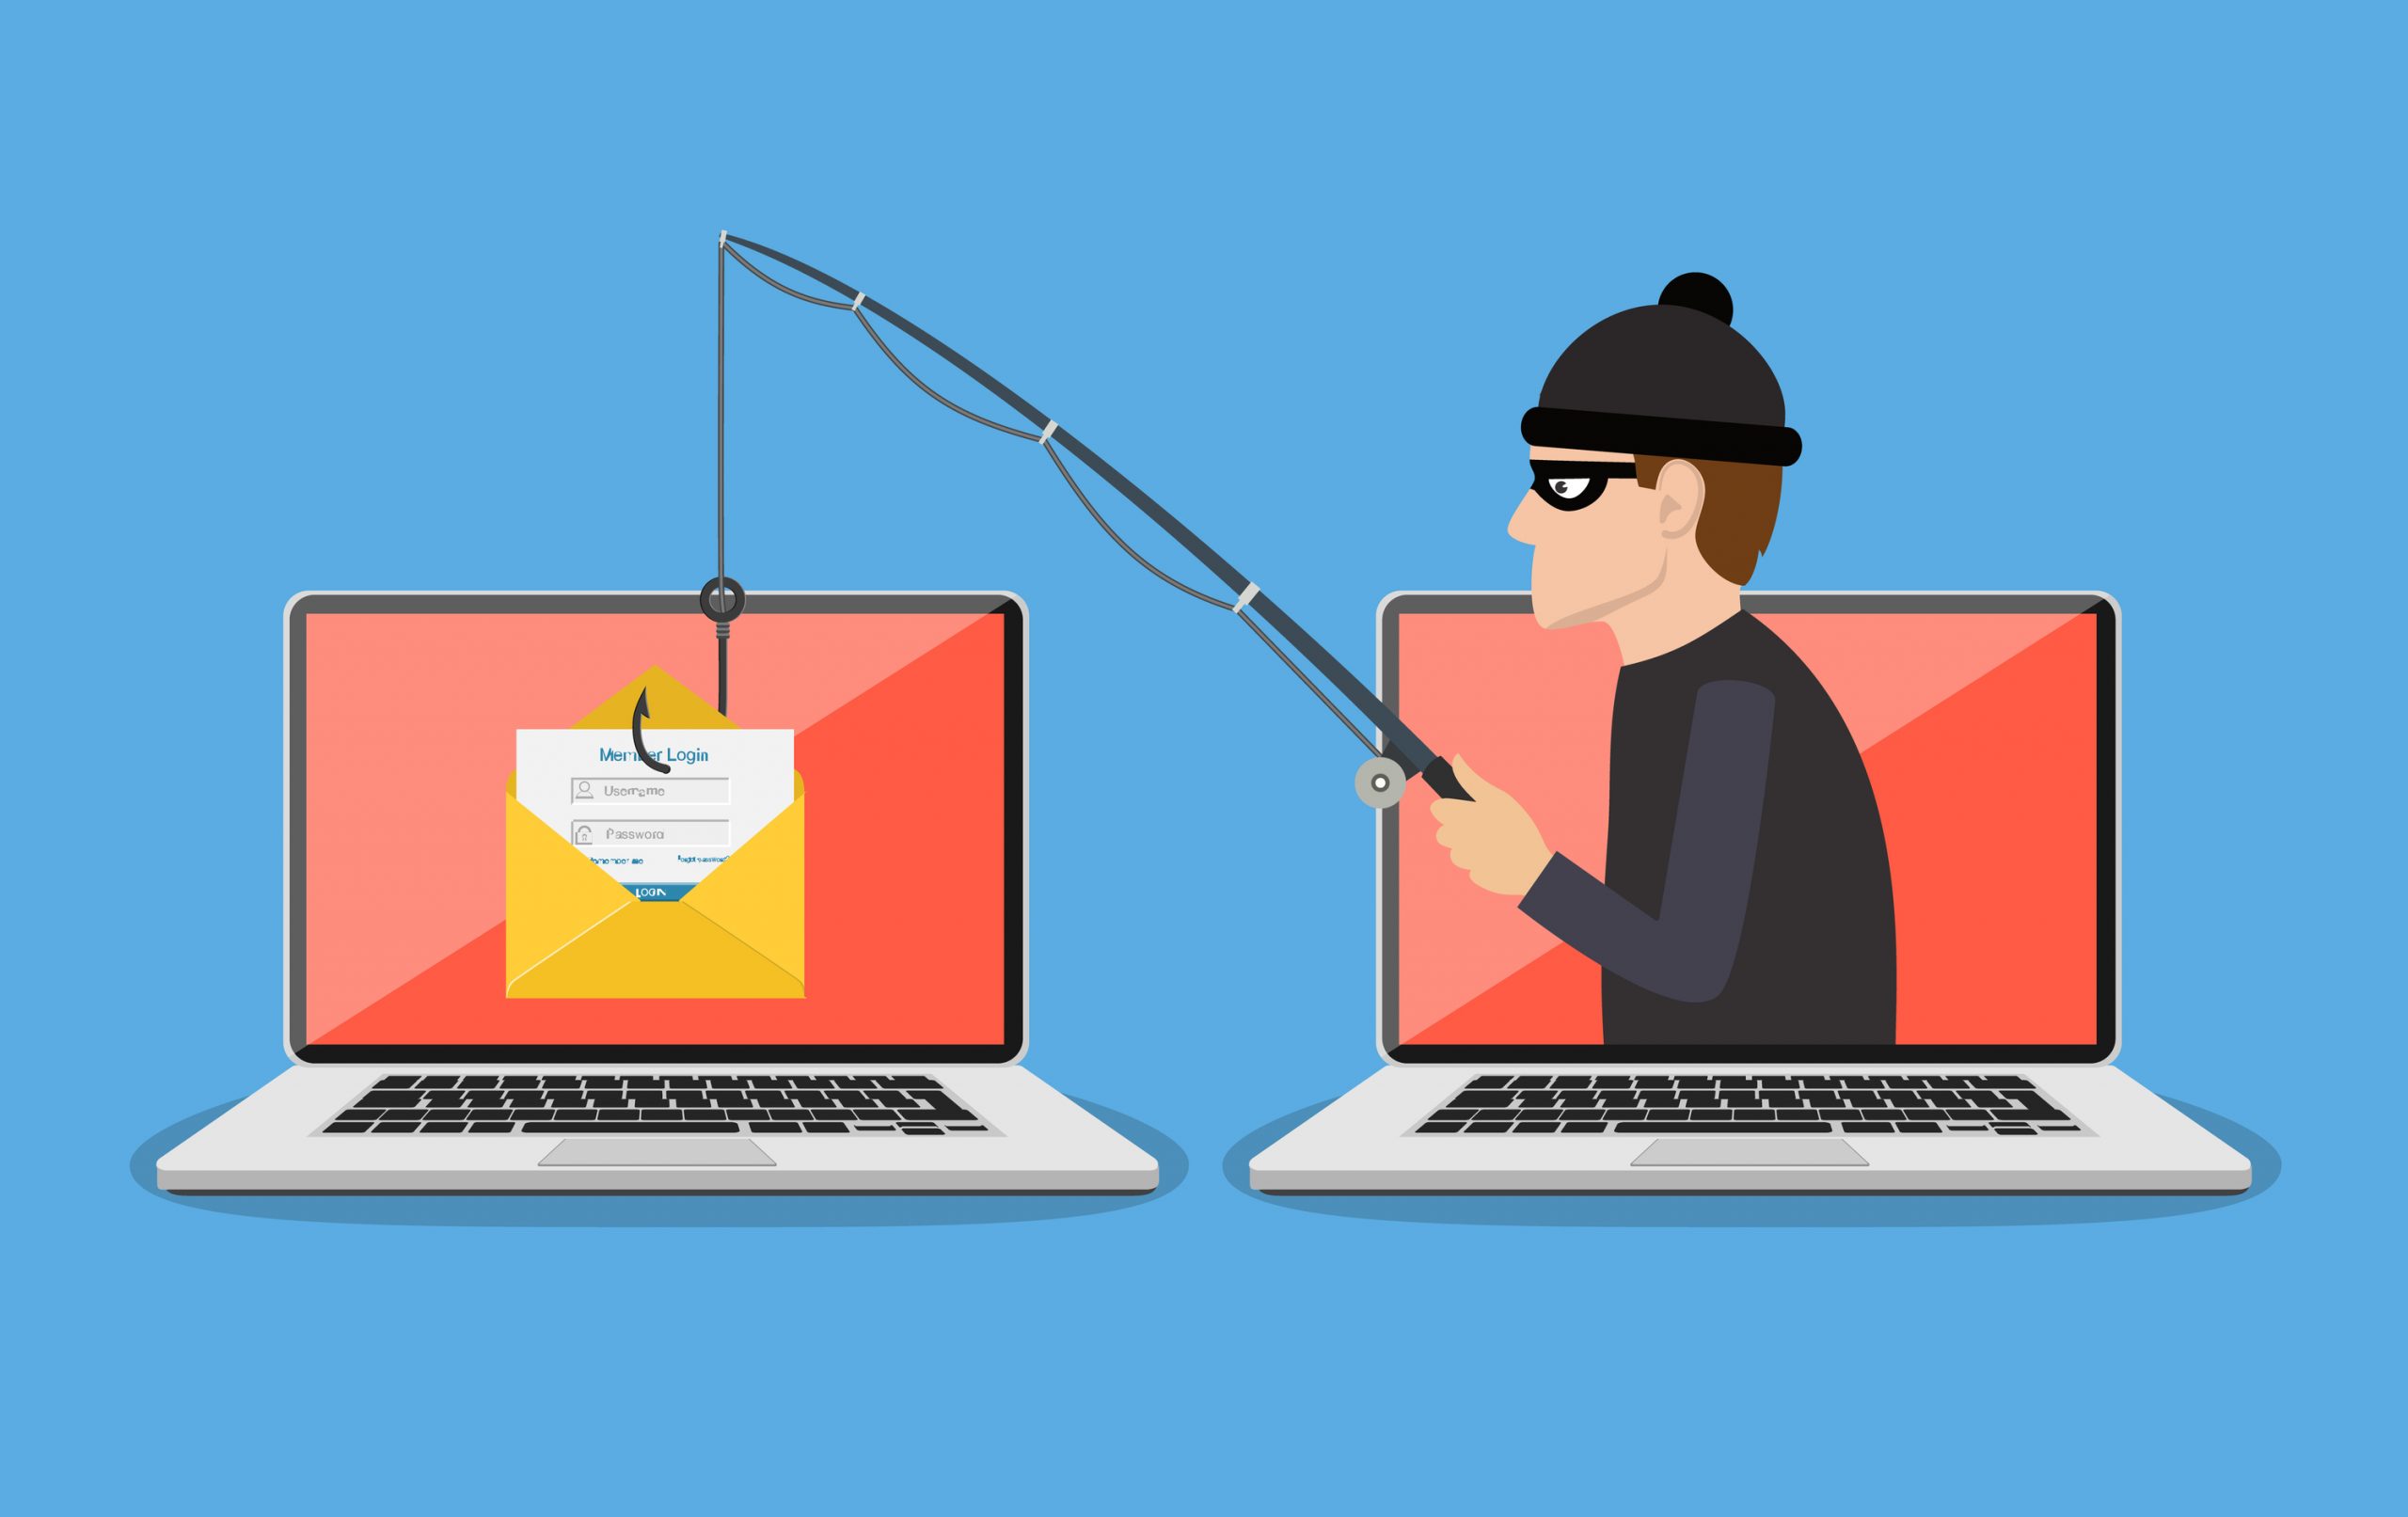 What Are the Best Ways to Avoid Falling Victim to Phishing?